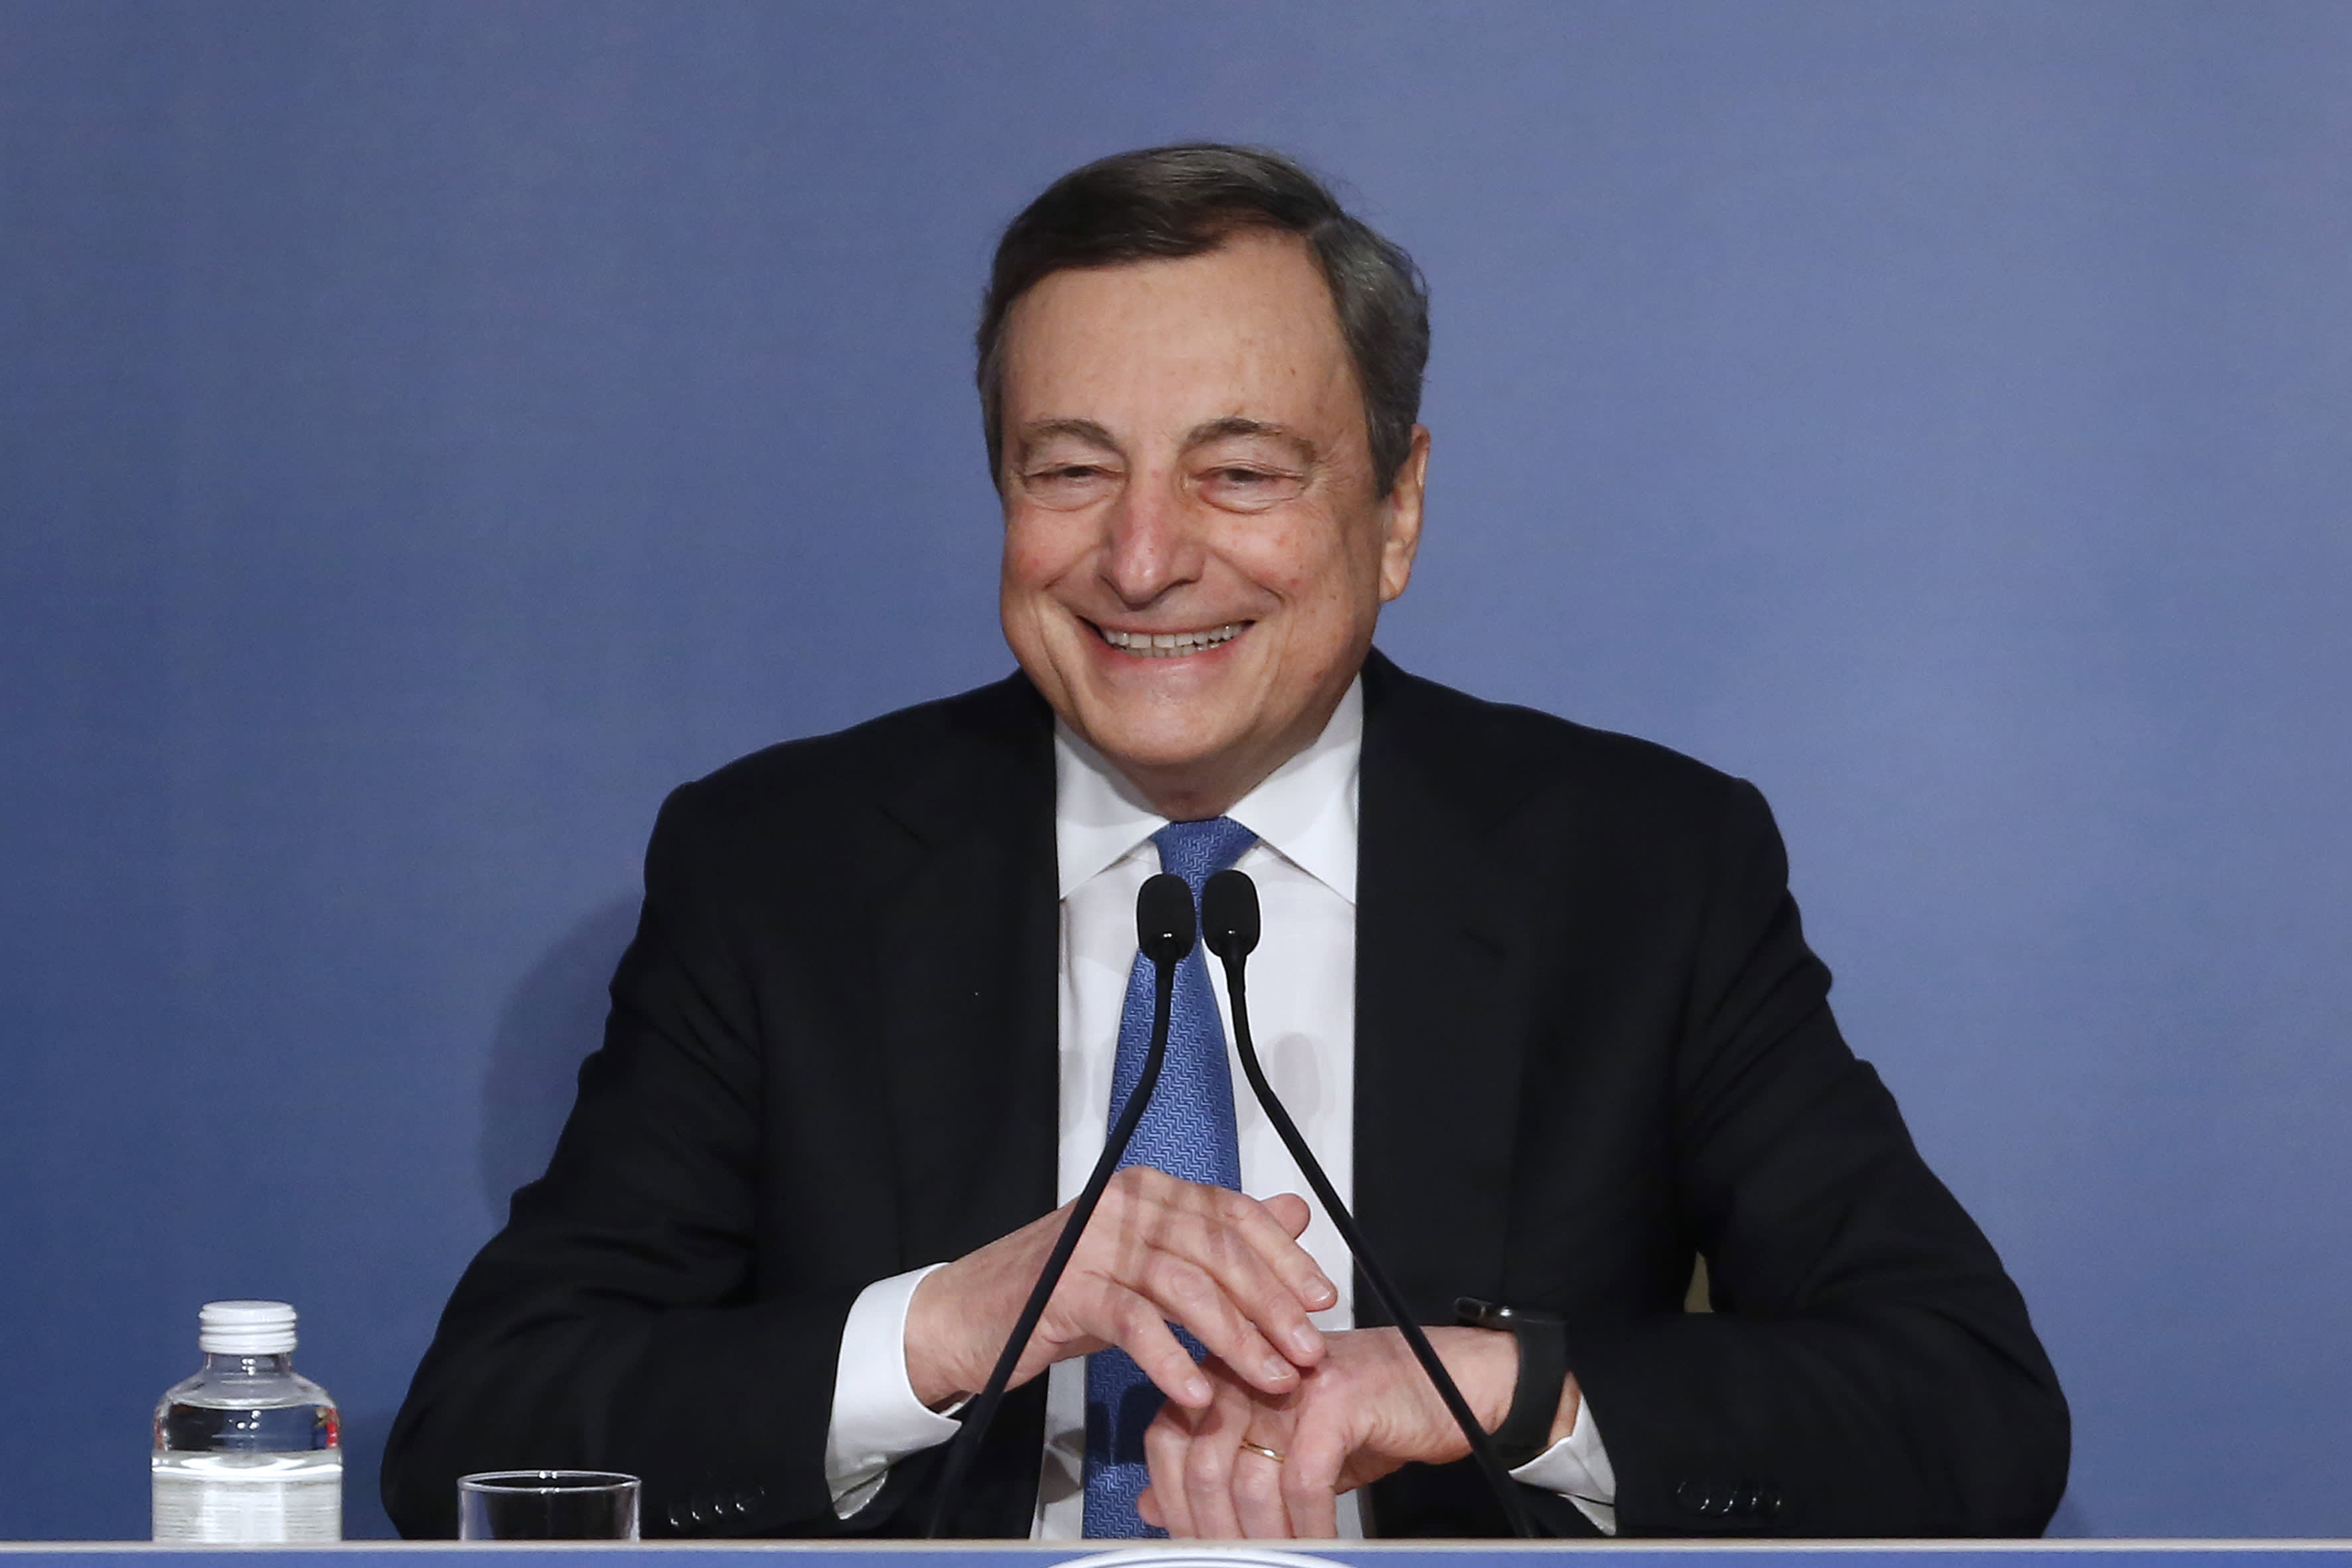 Mario Draghi Brought Political Stability to Italy. Now, a Key Election Threatens It All – NBC 7 San Diego